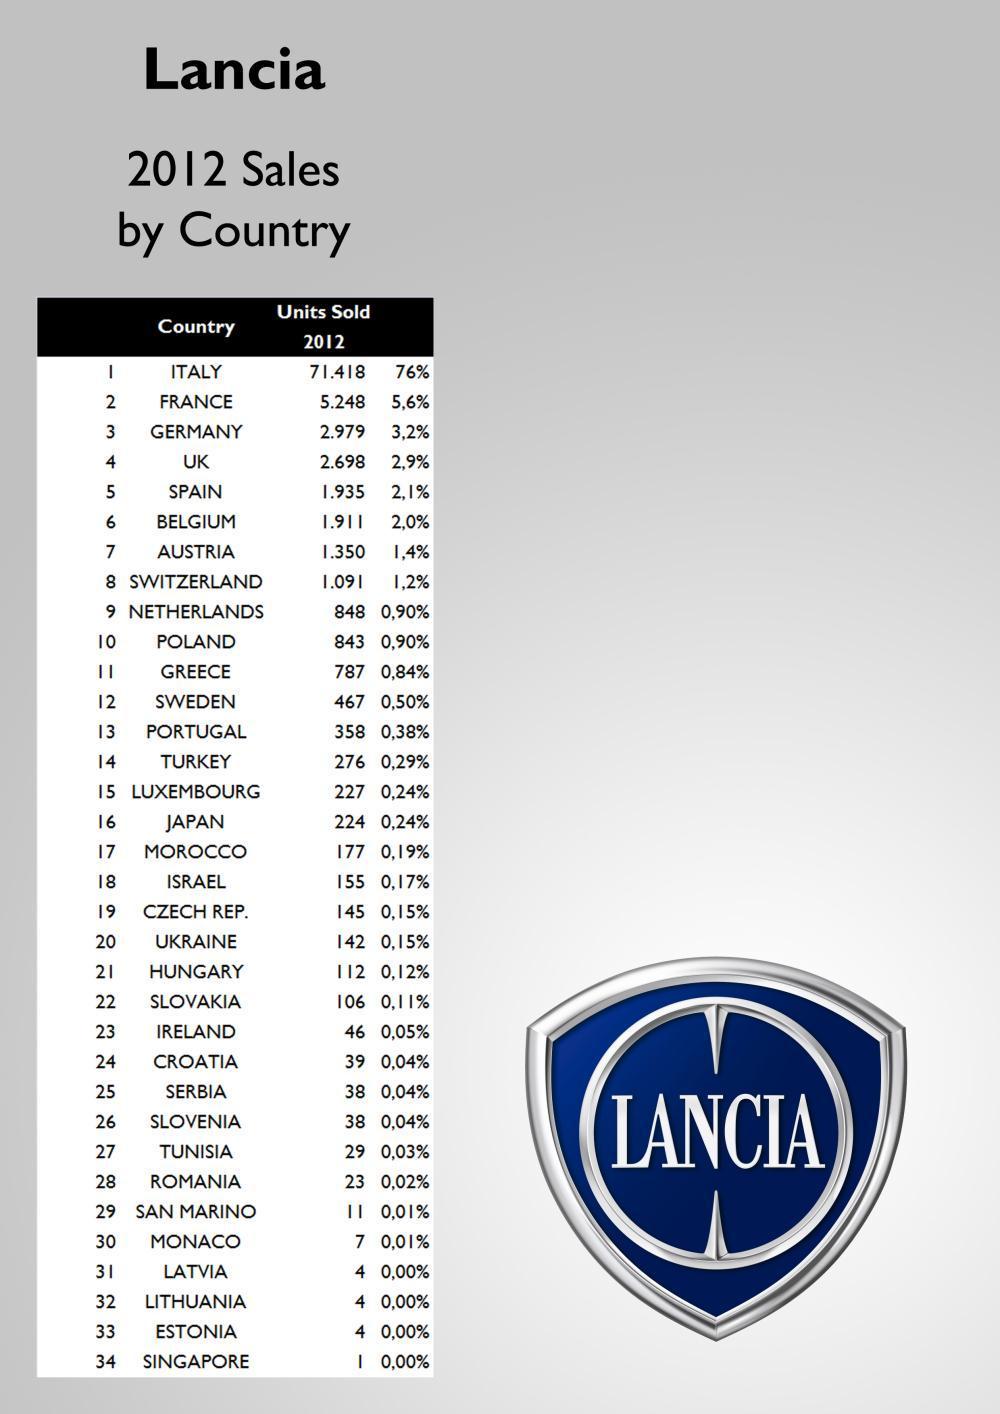 lancia-sales-by-country-2012.jpg